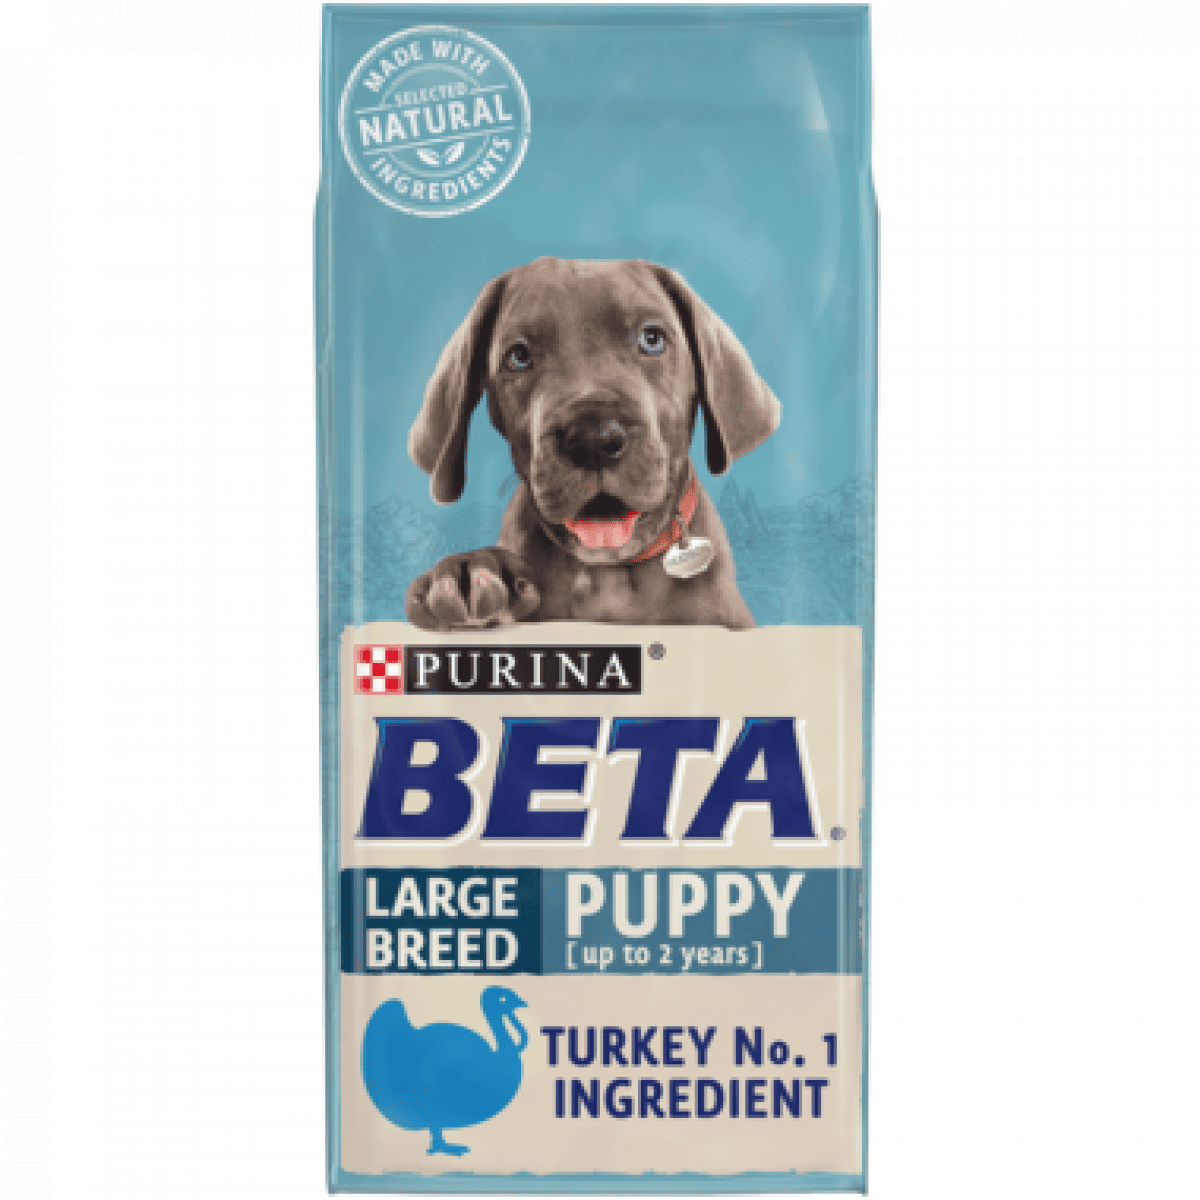 Beta Large Breed Puppy 14kg – Pawfect Supplies Ltd Product Image